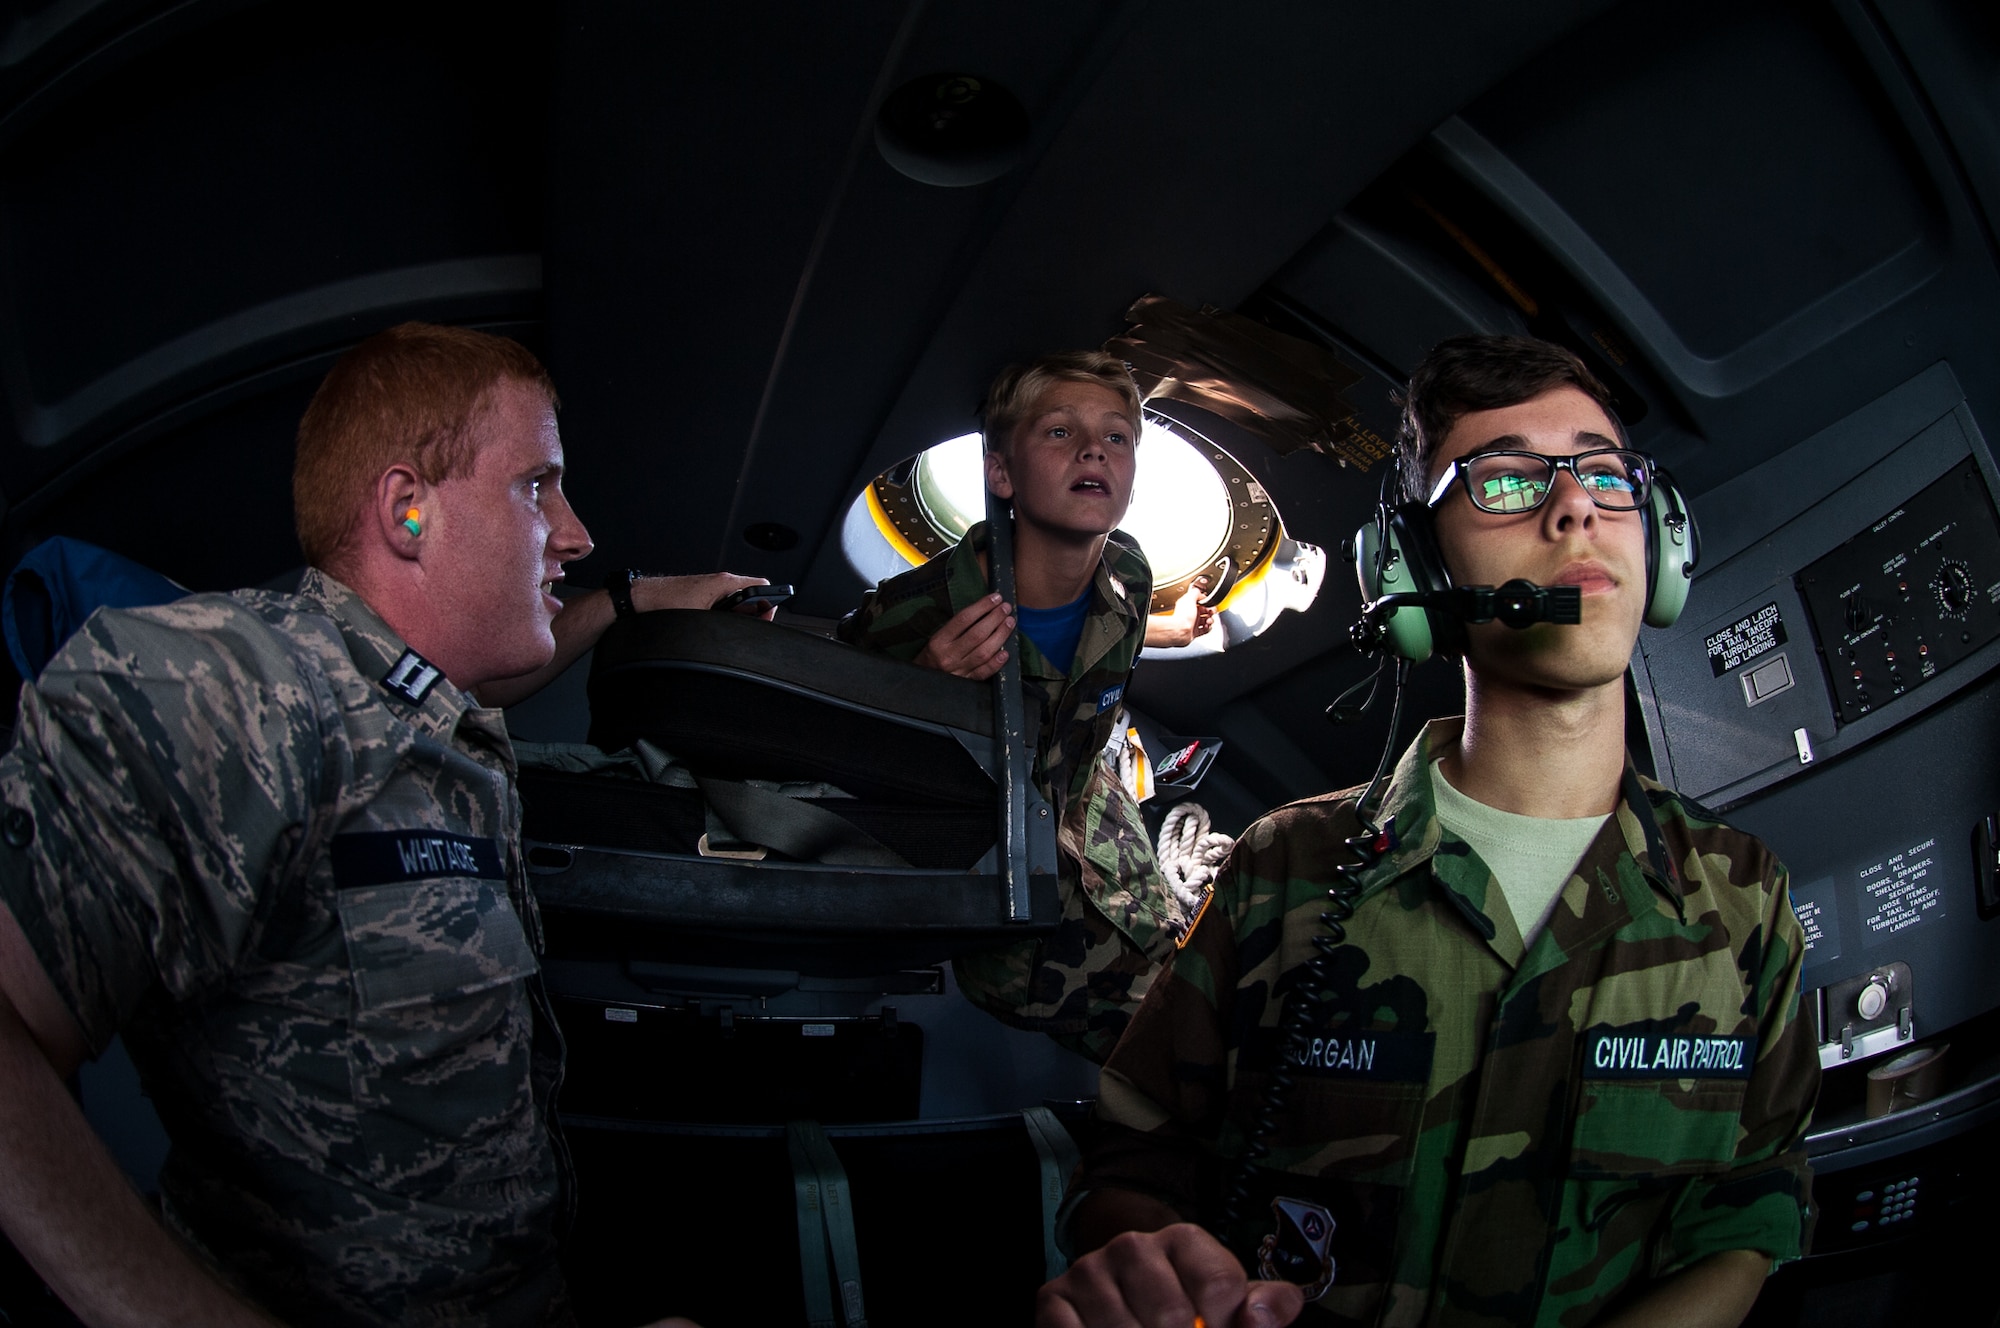 Civil Air Patrol Capt. Brad Whitacre, Wiesbaden Cadet Flight encampment deputy commander, educates Cadet Master Sgt. John Odom, Ramstein Cadet Squadron, and Cadet Airman Karim Morgan, Wiesbaden Cadet Flight, about piloting during a flight over Rheinland-Pfalz, Germany, June 20, 2017. The cadets watched pilots from the 37th Airlift Squadron operate the C-130J Super Hercules to get an idea of what it’s like to be a pilot. (U.S. Air Force photo by Senior Airman Devin Boyer)